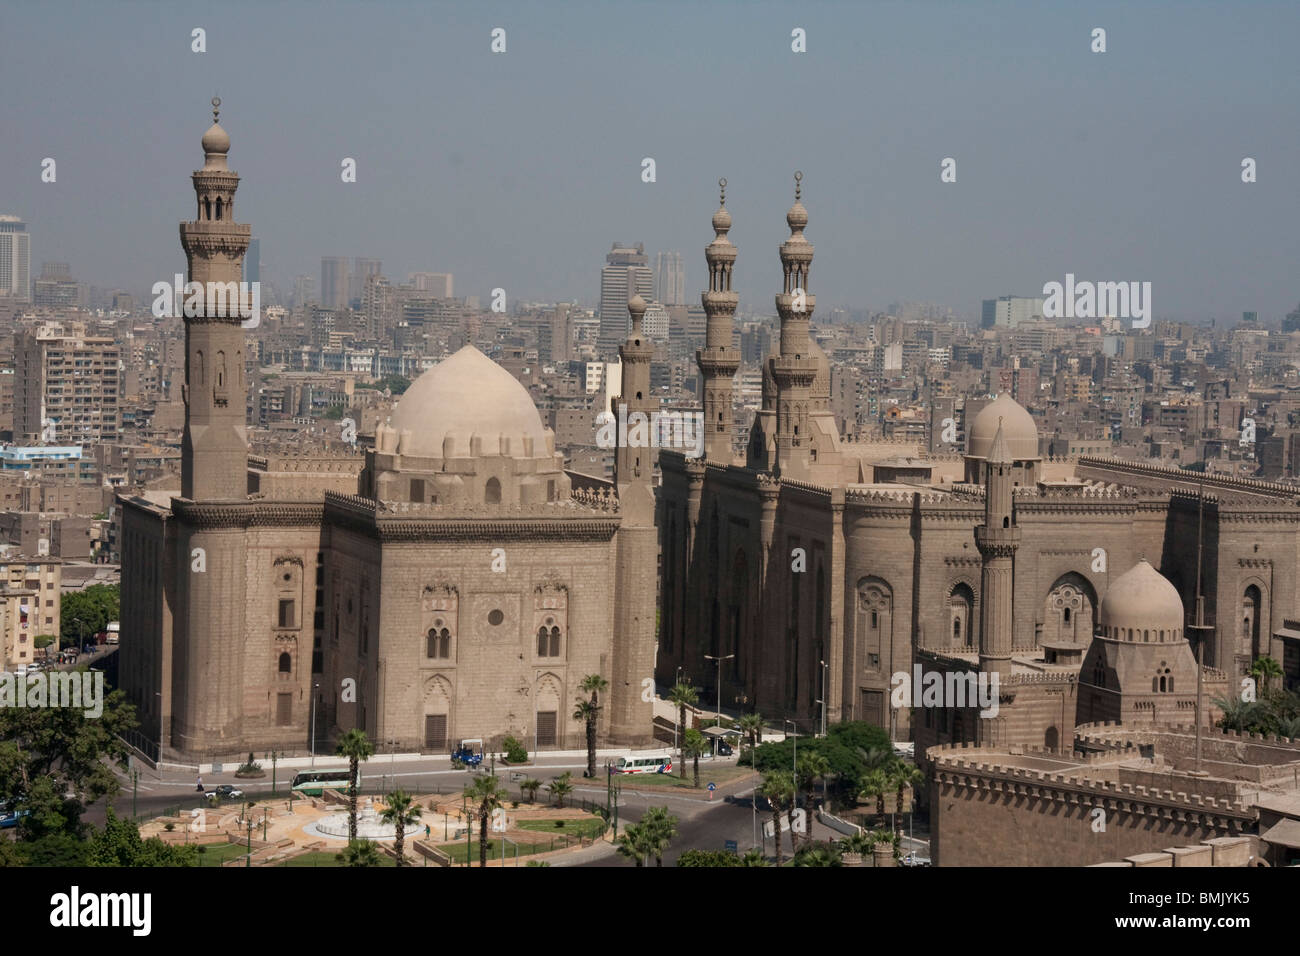 Al-Rifai Mosque and Mosque of Sultan Hassan, as seen from the Citadel, Cairo, Al Qahirah, Egypt Stock Photo